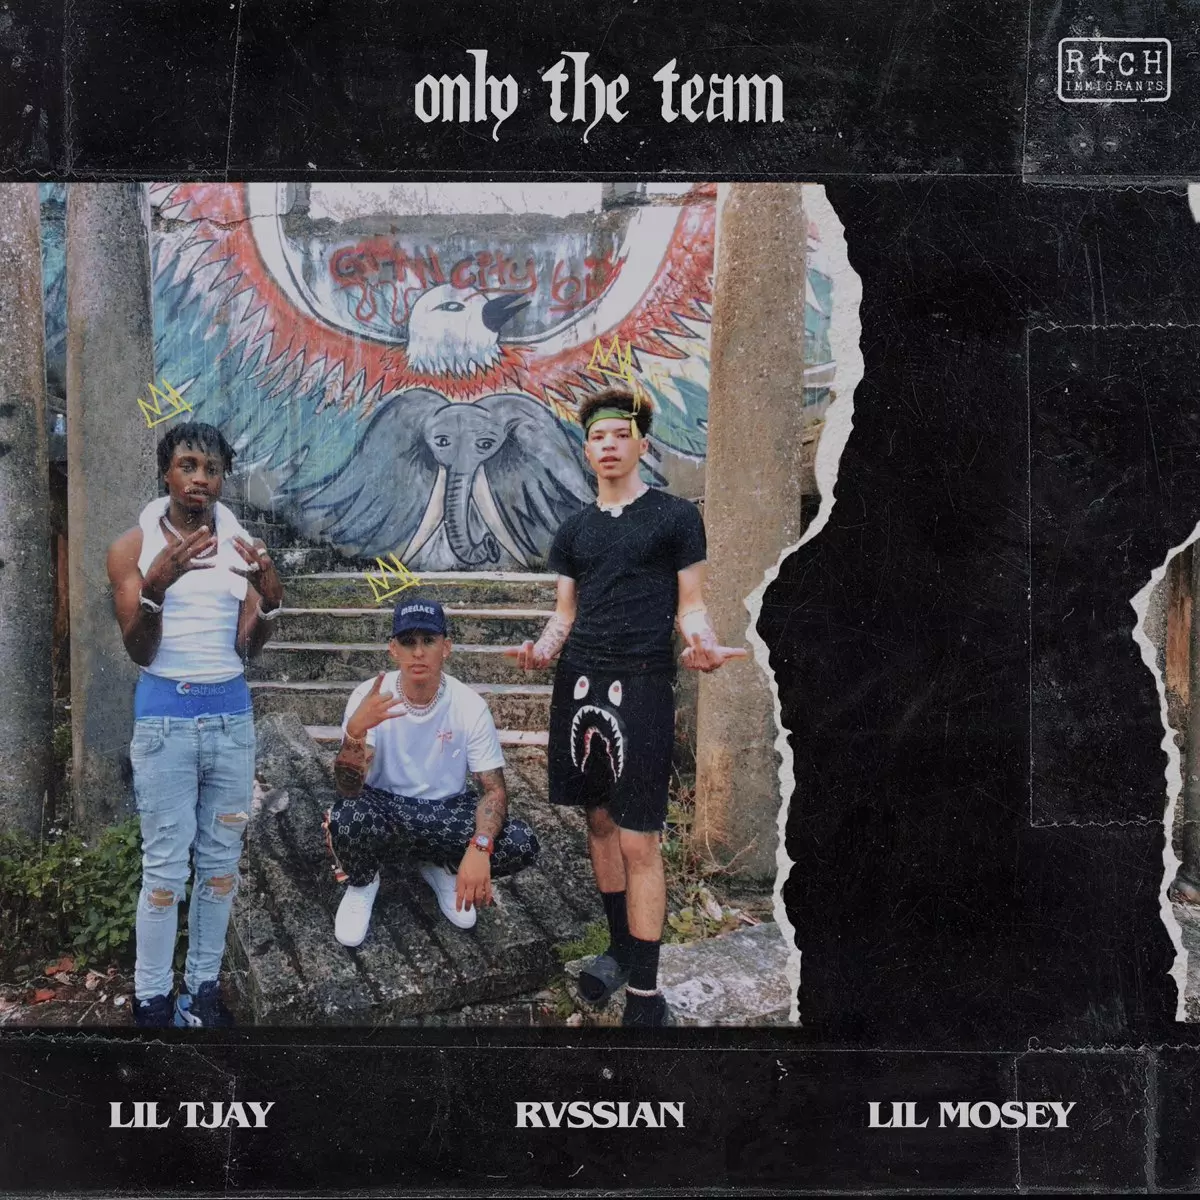 Only the Team - Single by Rvssian, Lil Mosey & Lil Tjay on Apple Music